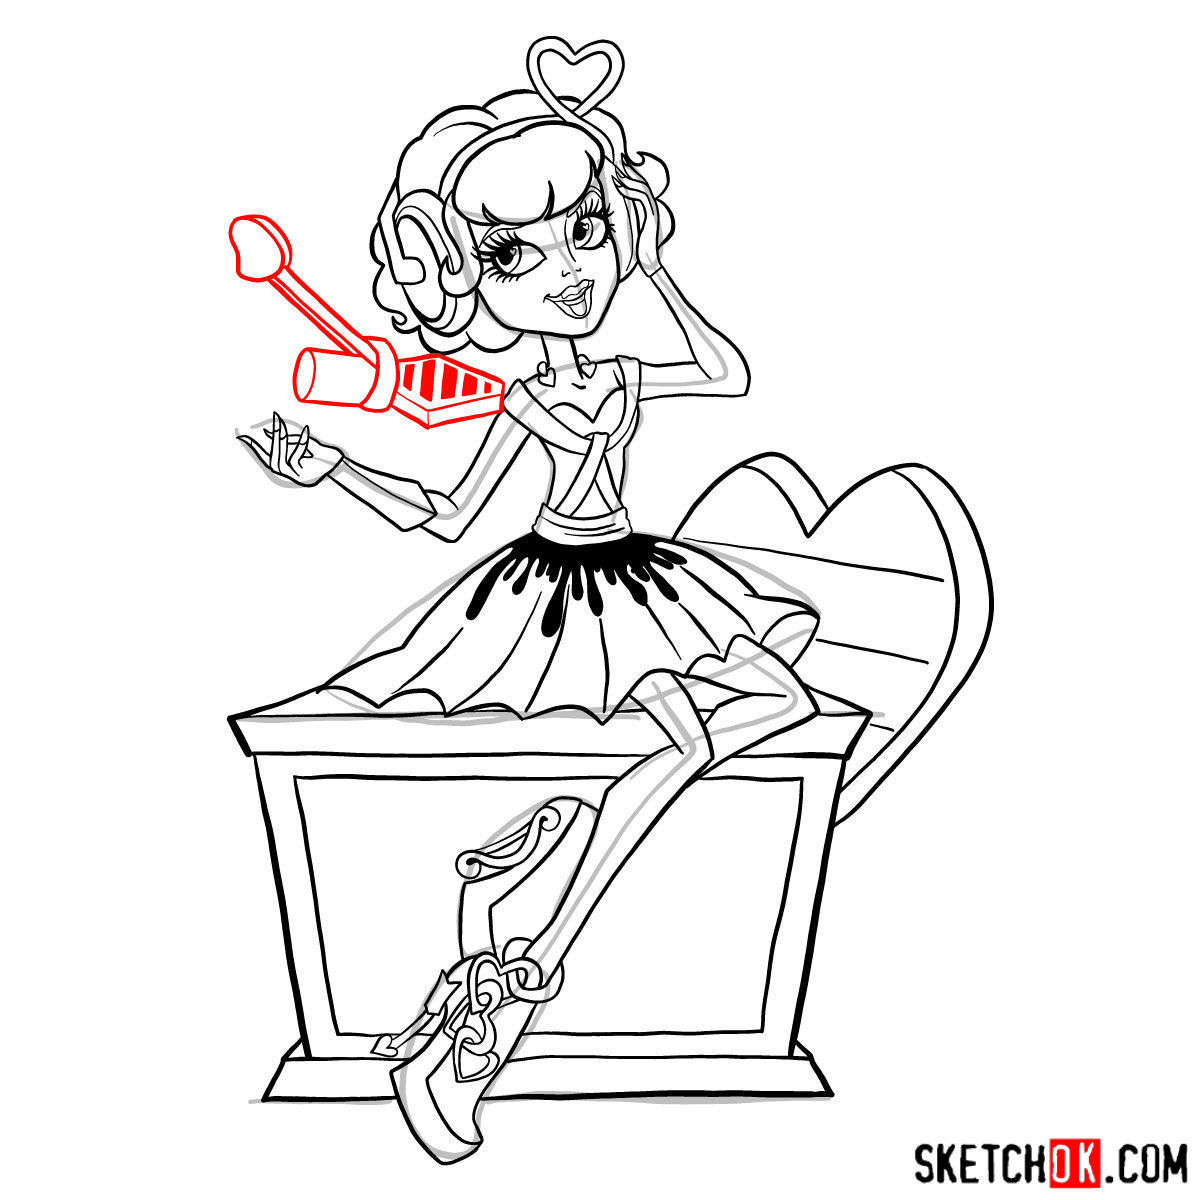 How to draw C.A. Cupid step by step - step 18